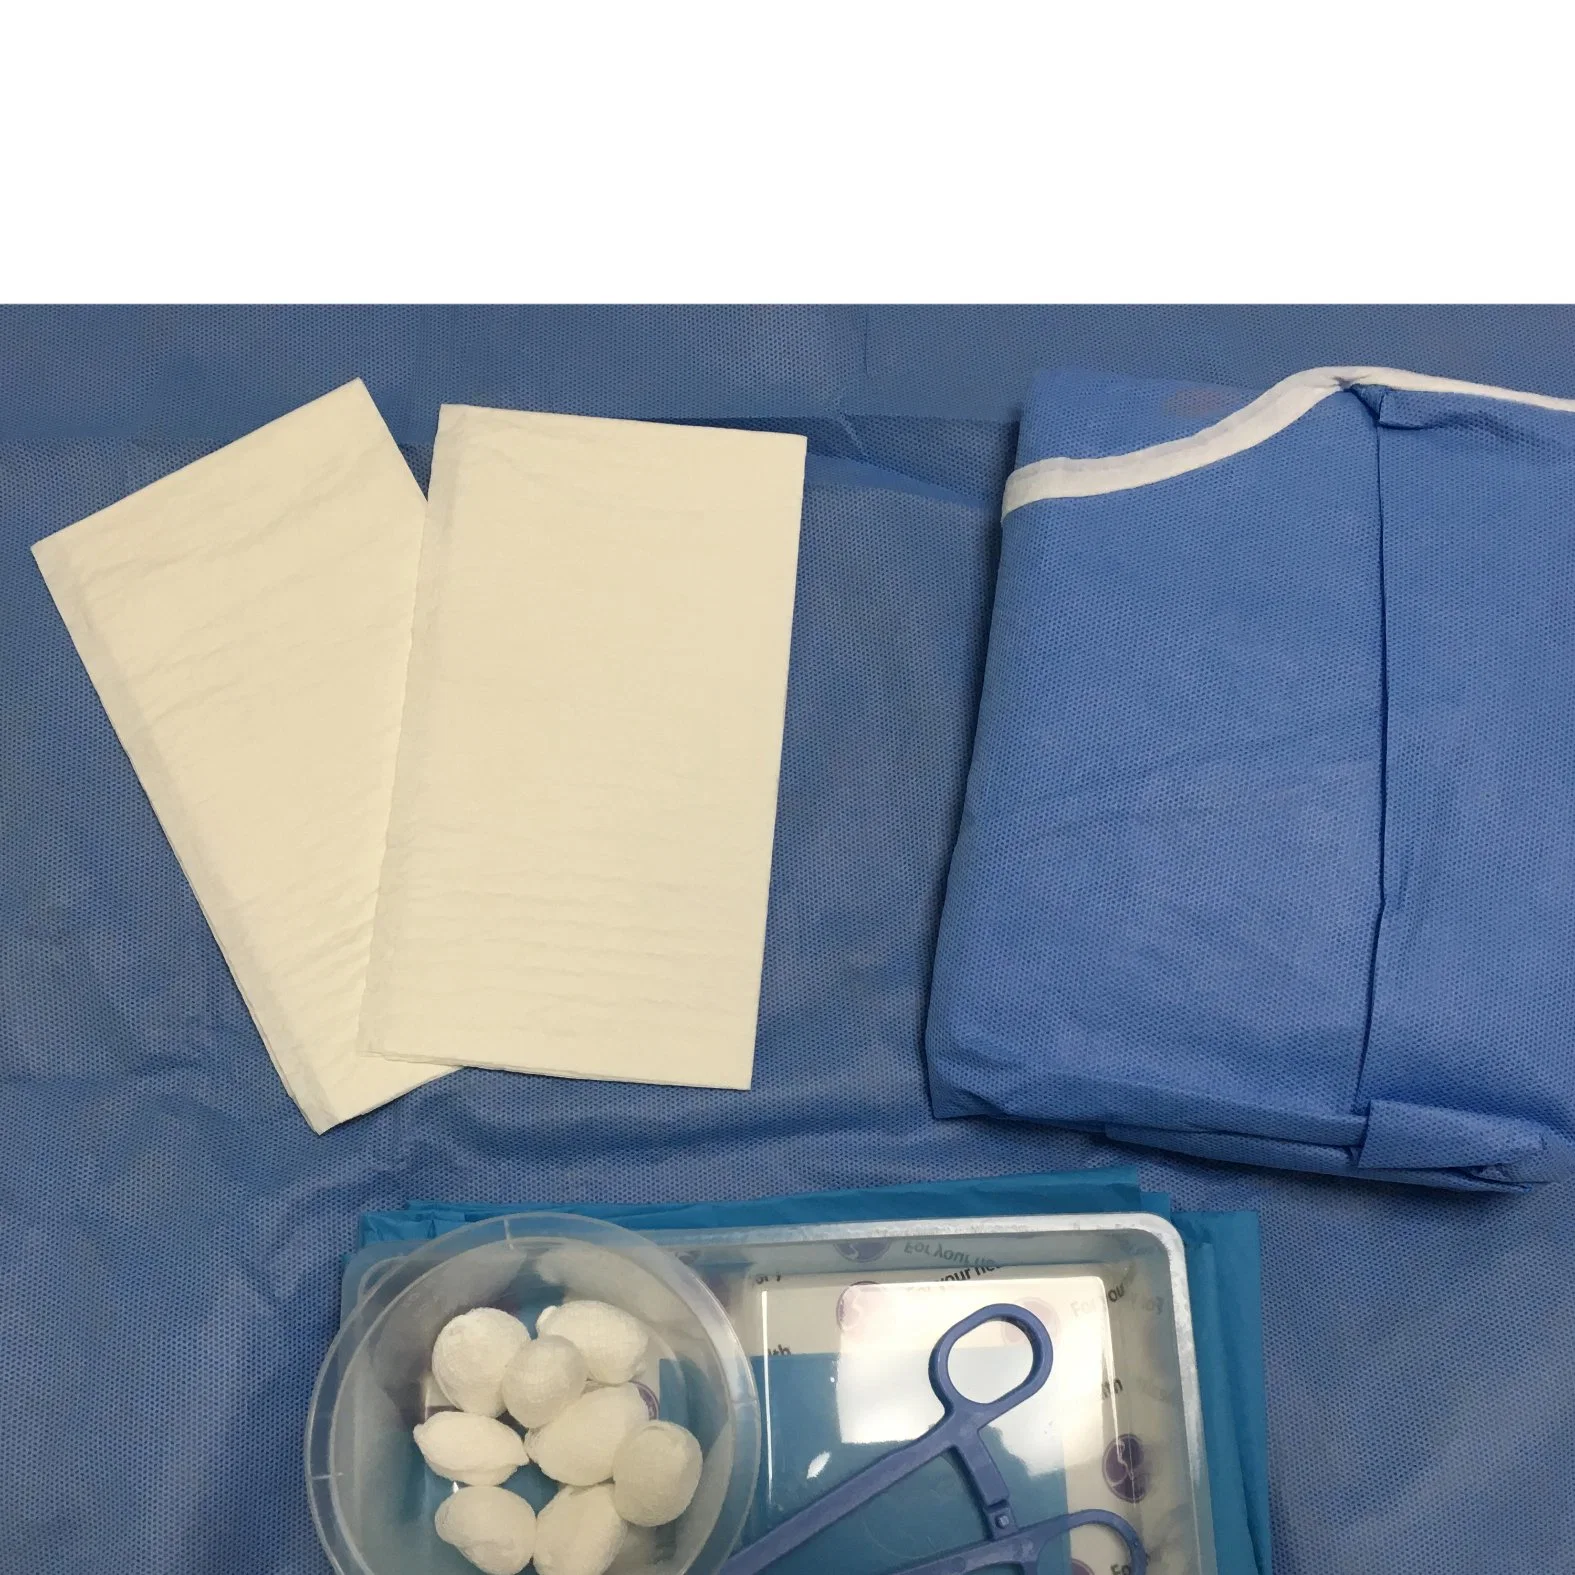 Medical Disposable Eo Sterilization Surgical Pack Caesarean Section/C-Section Operation Pack for Hospital Operating Room